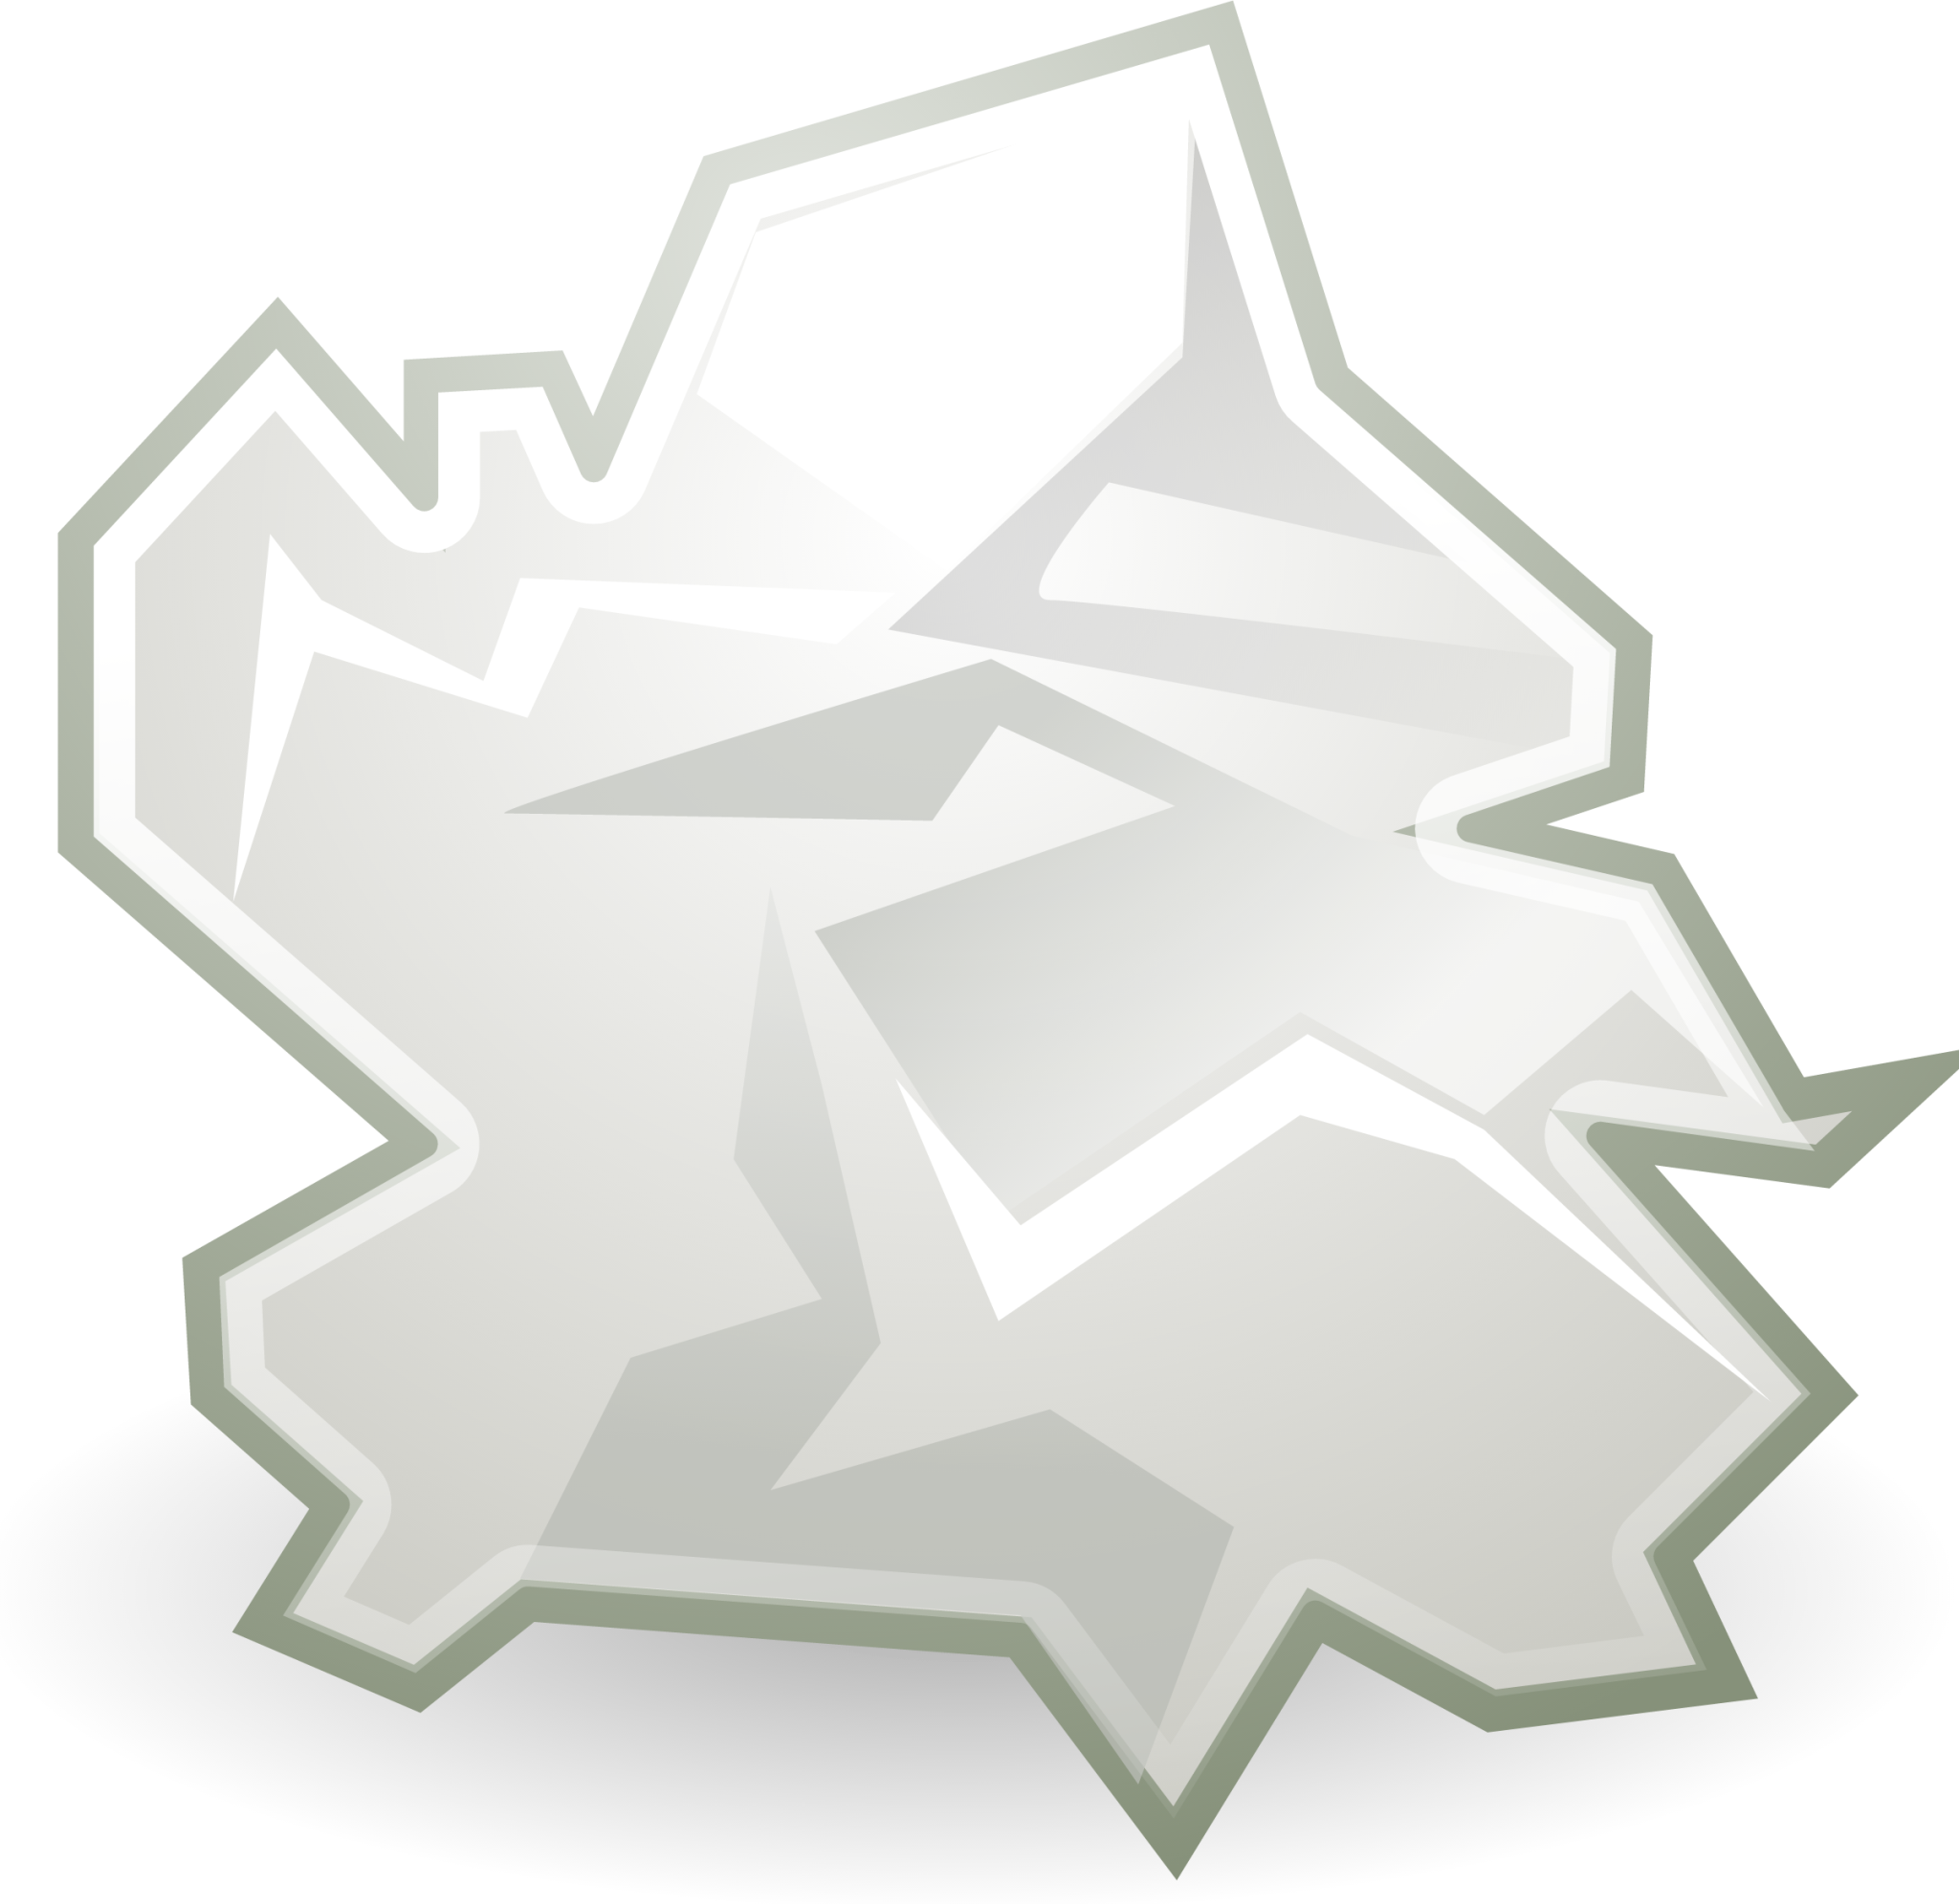 mail mark junk icon